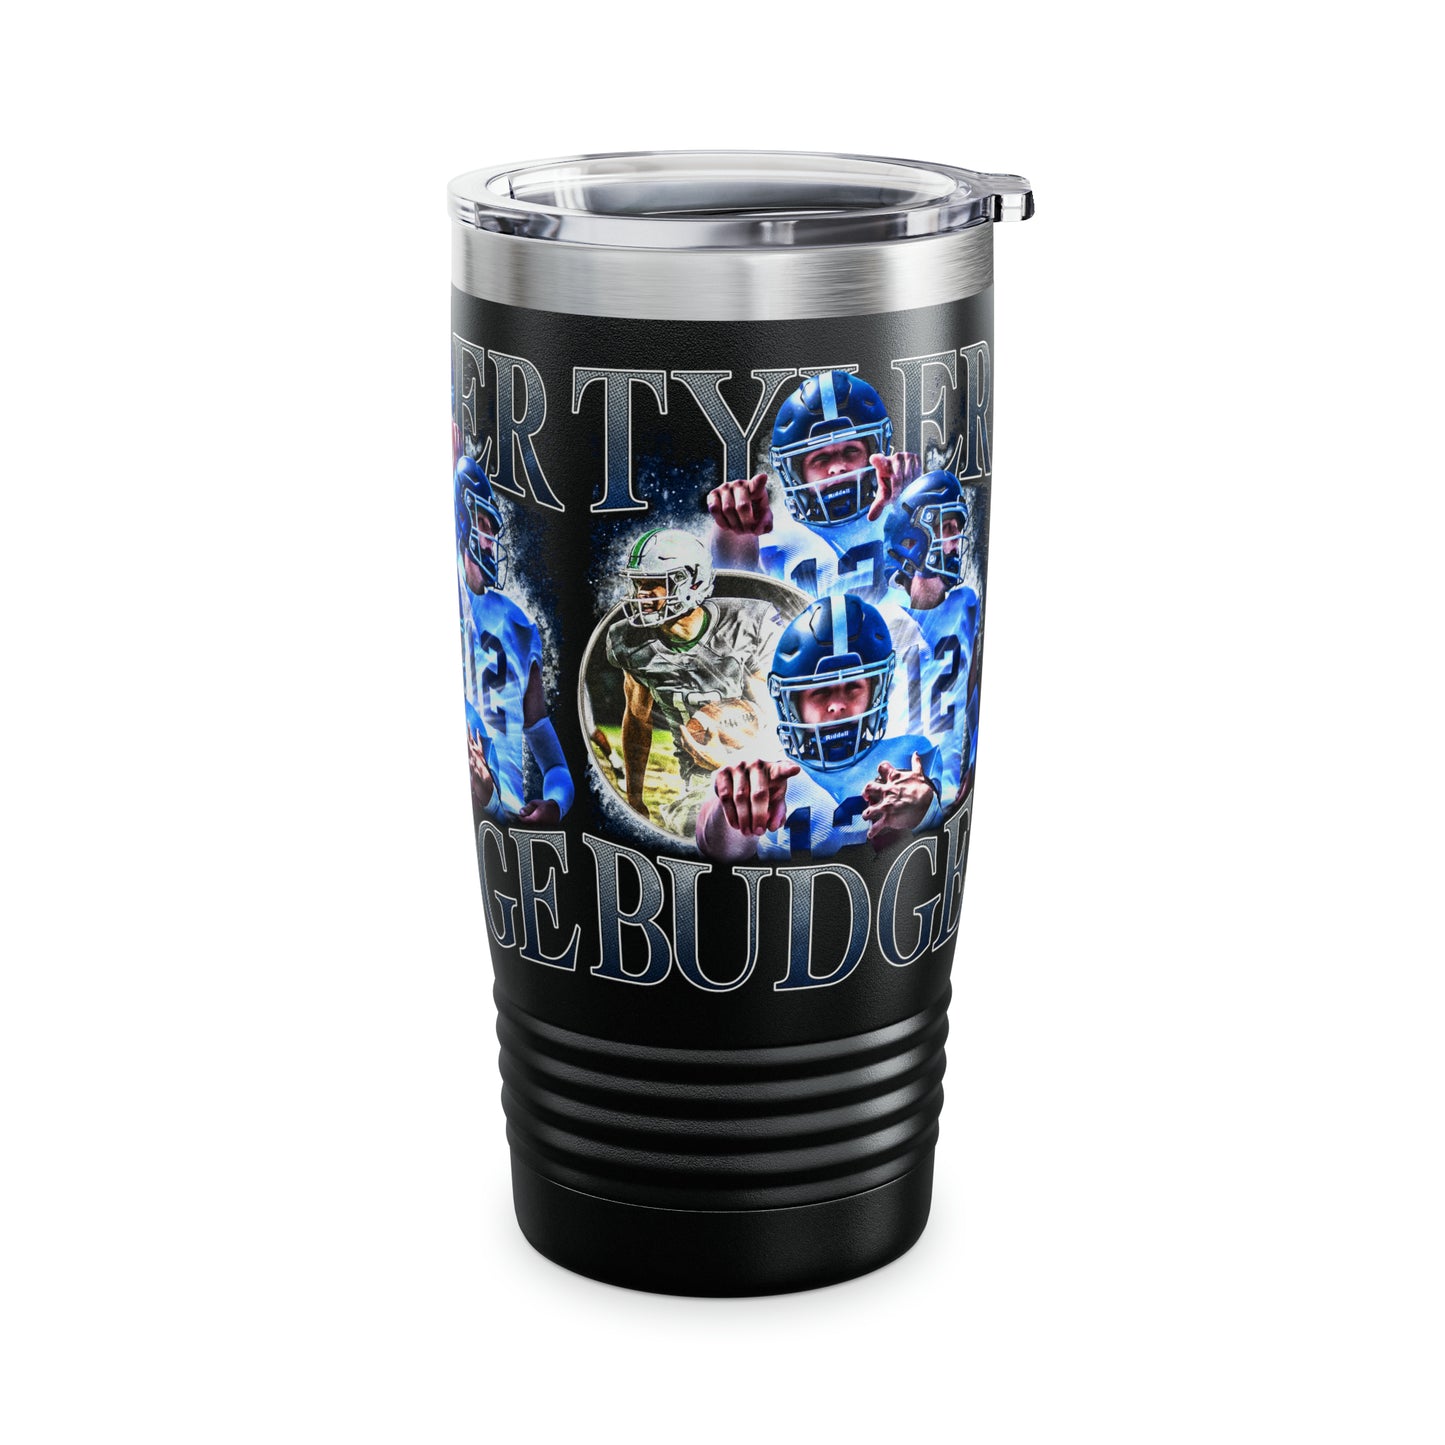 BUDGE STAINLESS STEEL TUMBLER